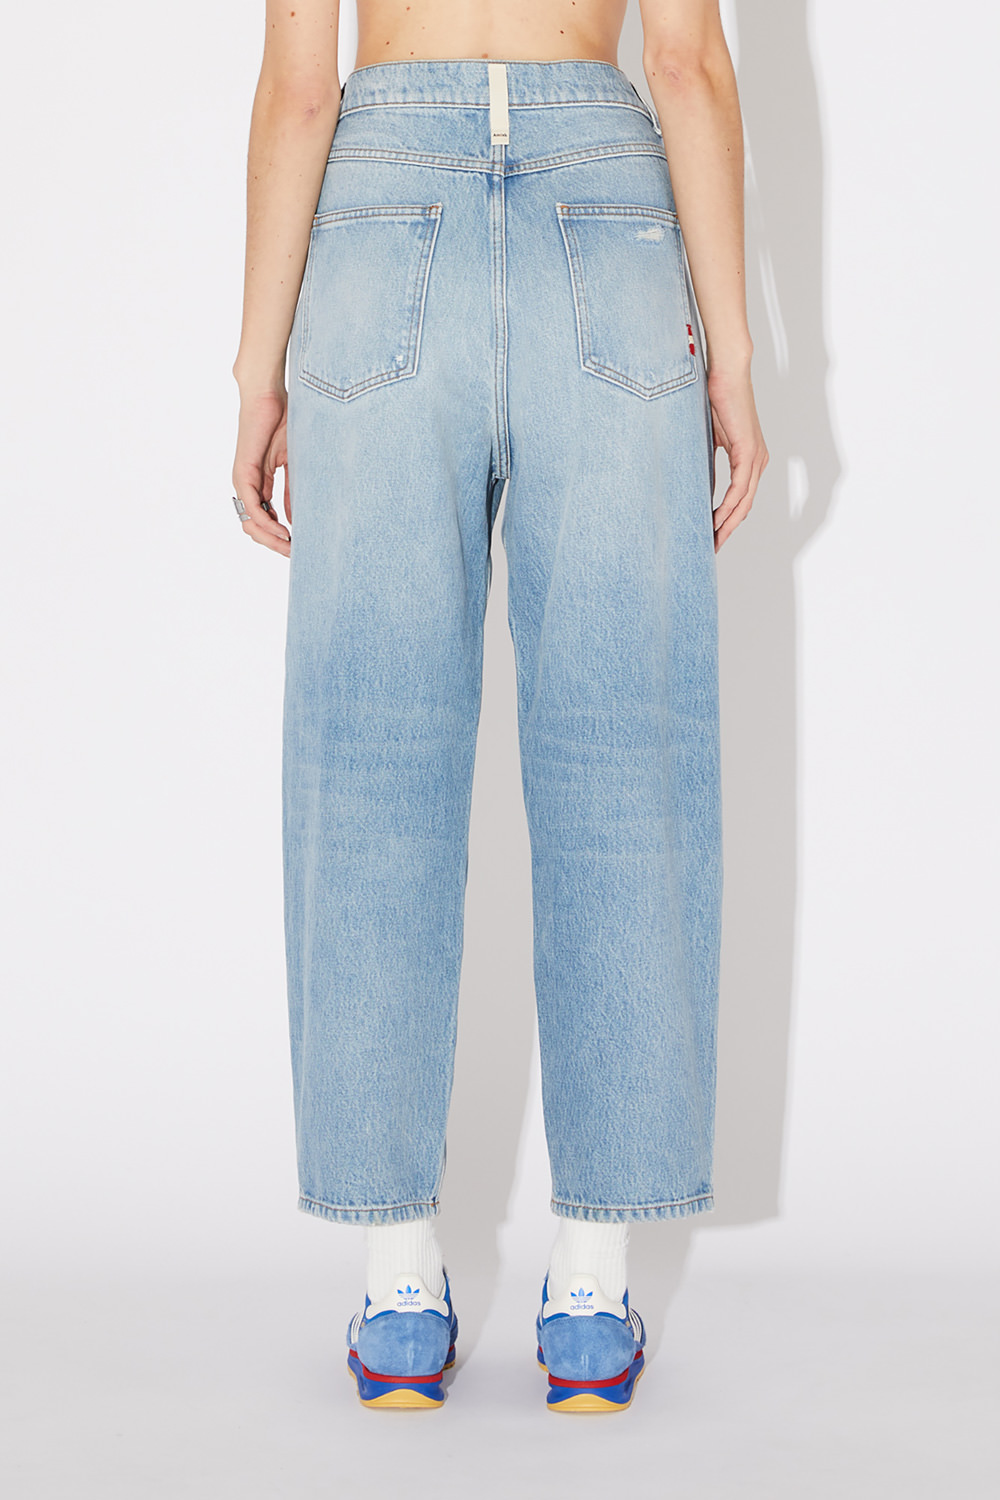 AMISH: SUPER USED BAGGY JEANS